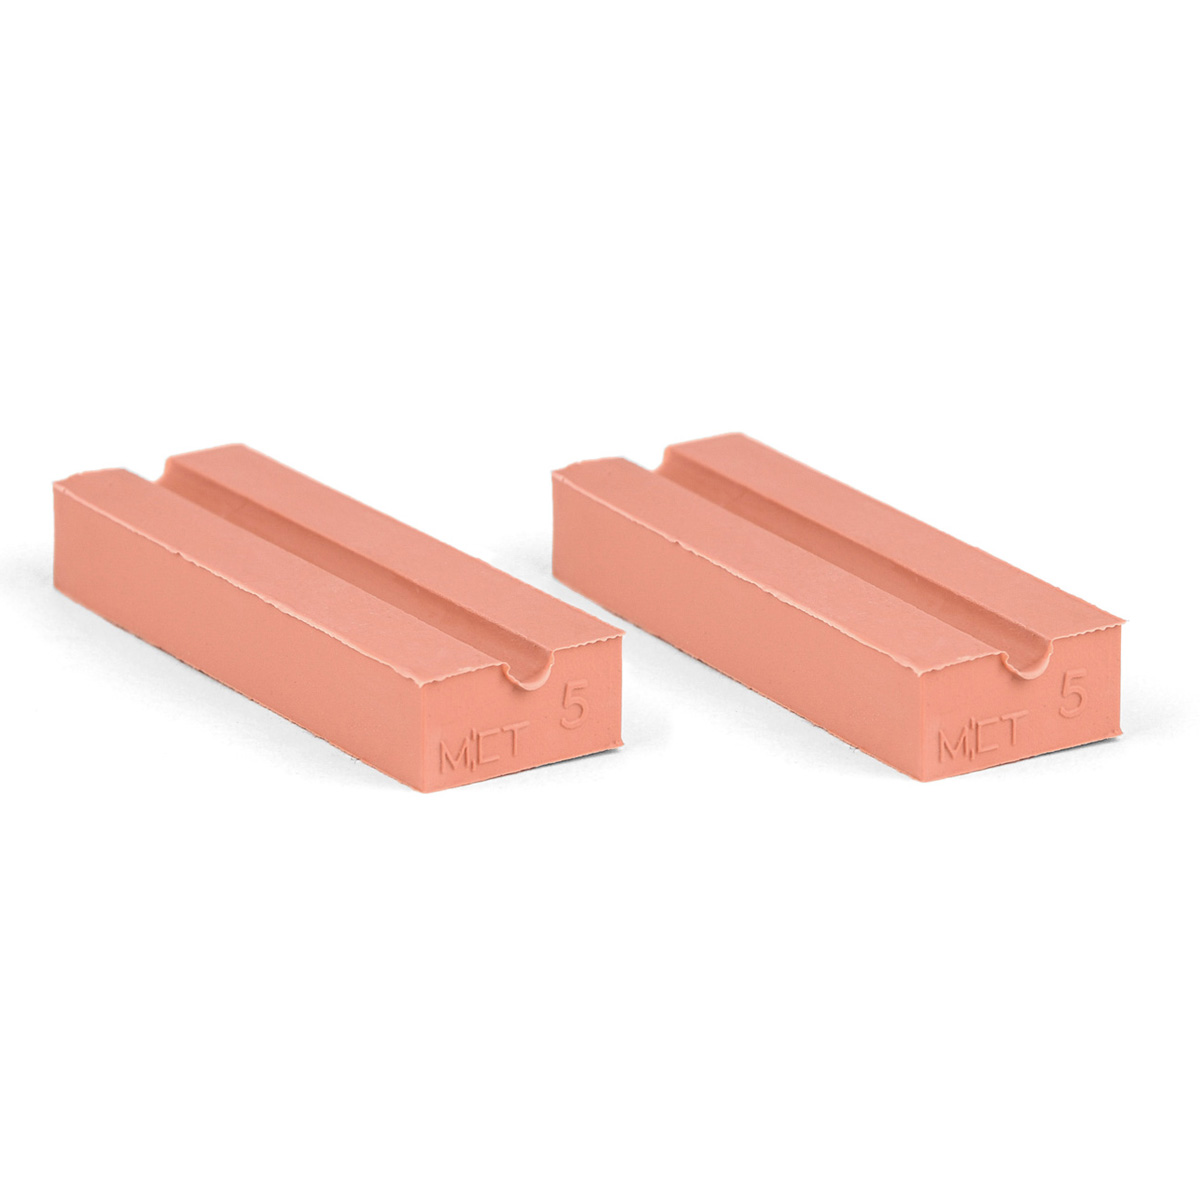 20-05*2 Set of 2 half insert block lycron 30mm, 20-05 for cable/pipe diam. 4.5-5.5mm